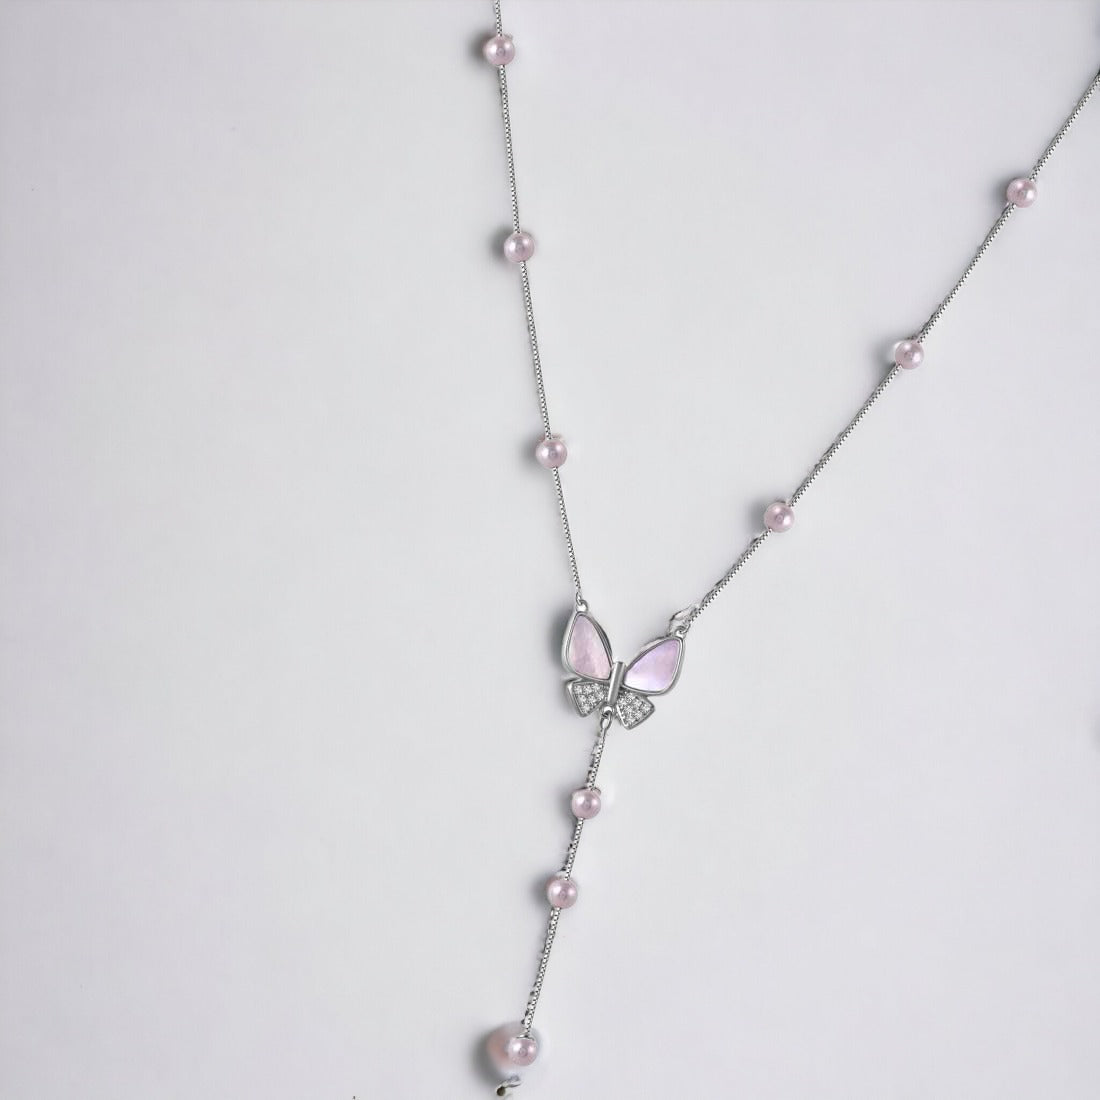 Drop String Necklace For Women & Girls